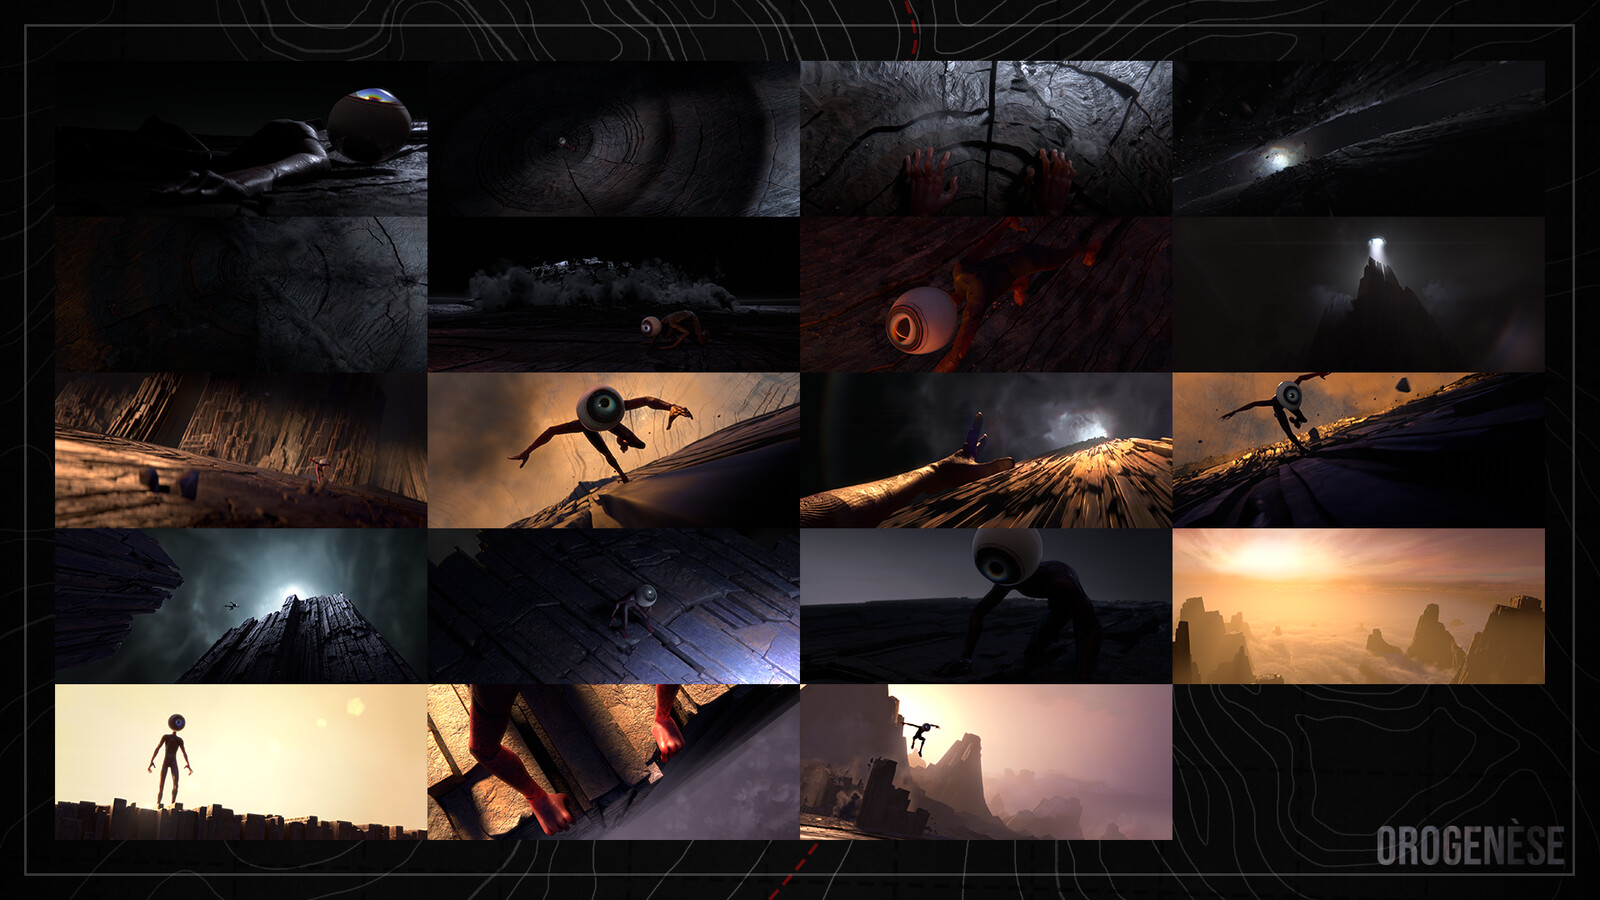 Thumbnails detailing all the environments I have to create. The matte paintings were all made by Axel, and the Lead Lighting was Roland.